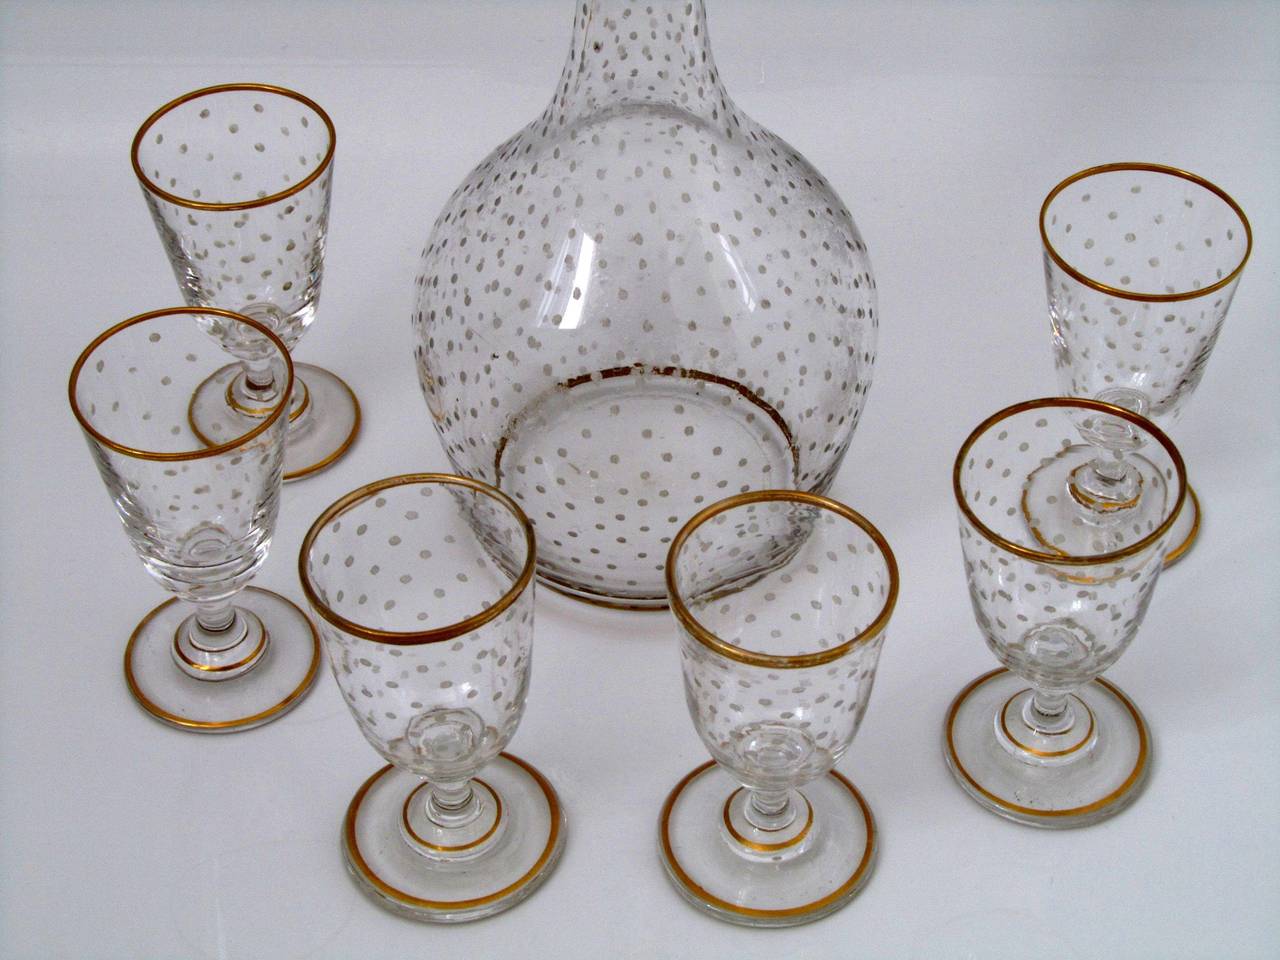 1870s French Gold Enamel Crystal Baccarat Liquor or Aperitif Service 8  pc For Sale 4